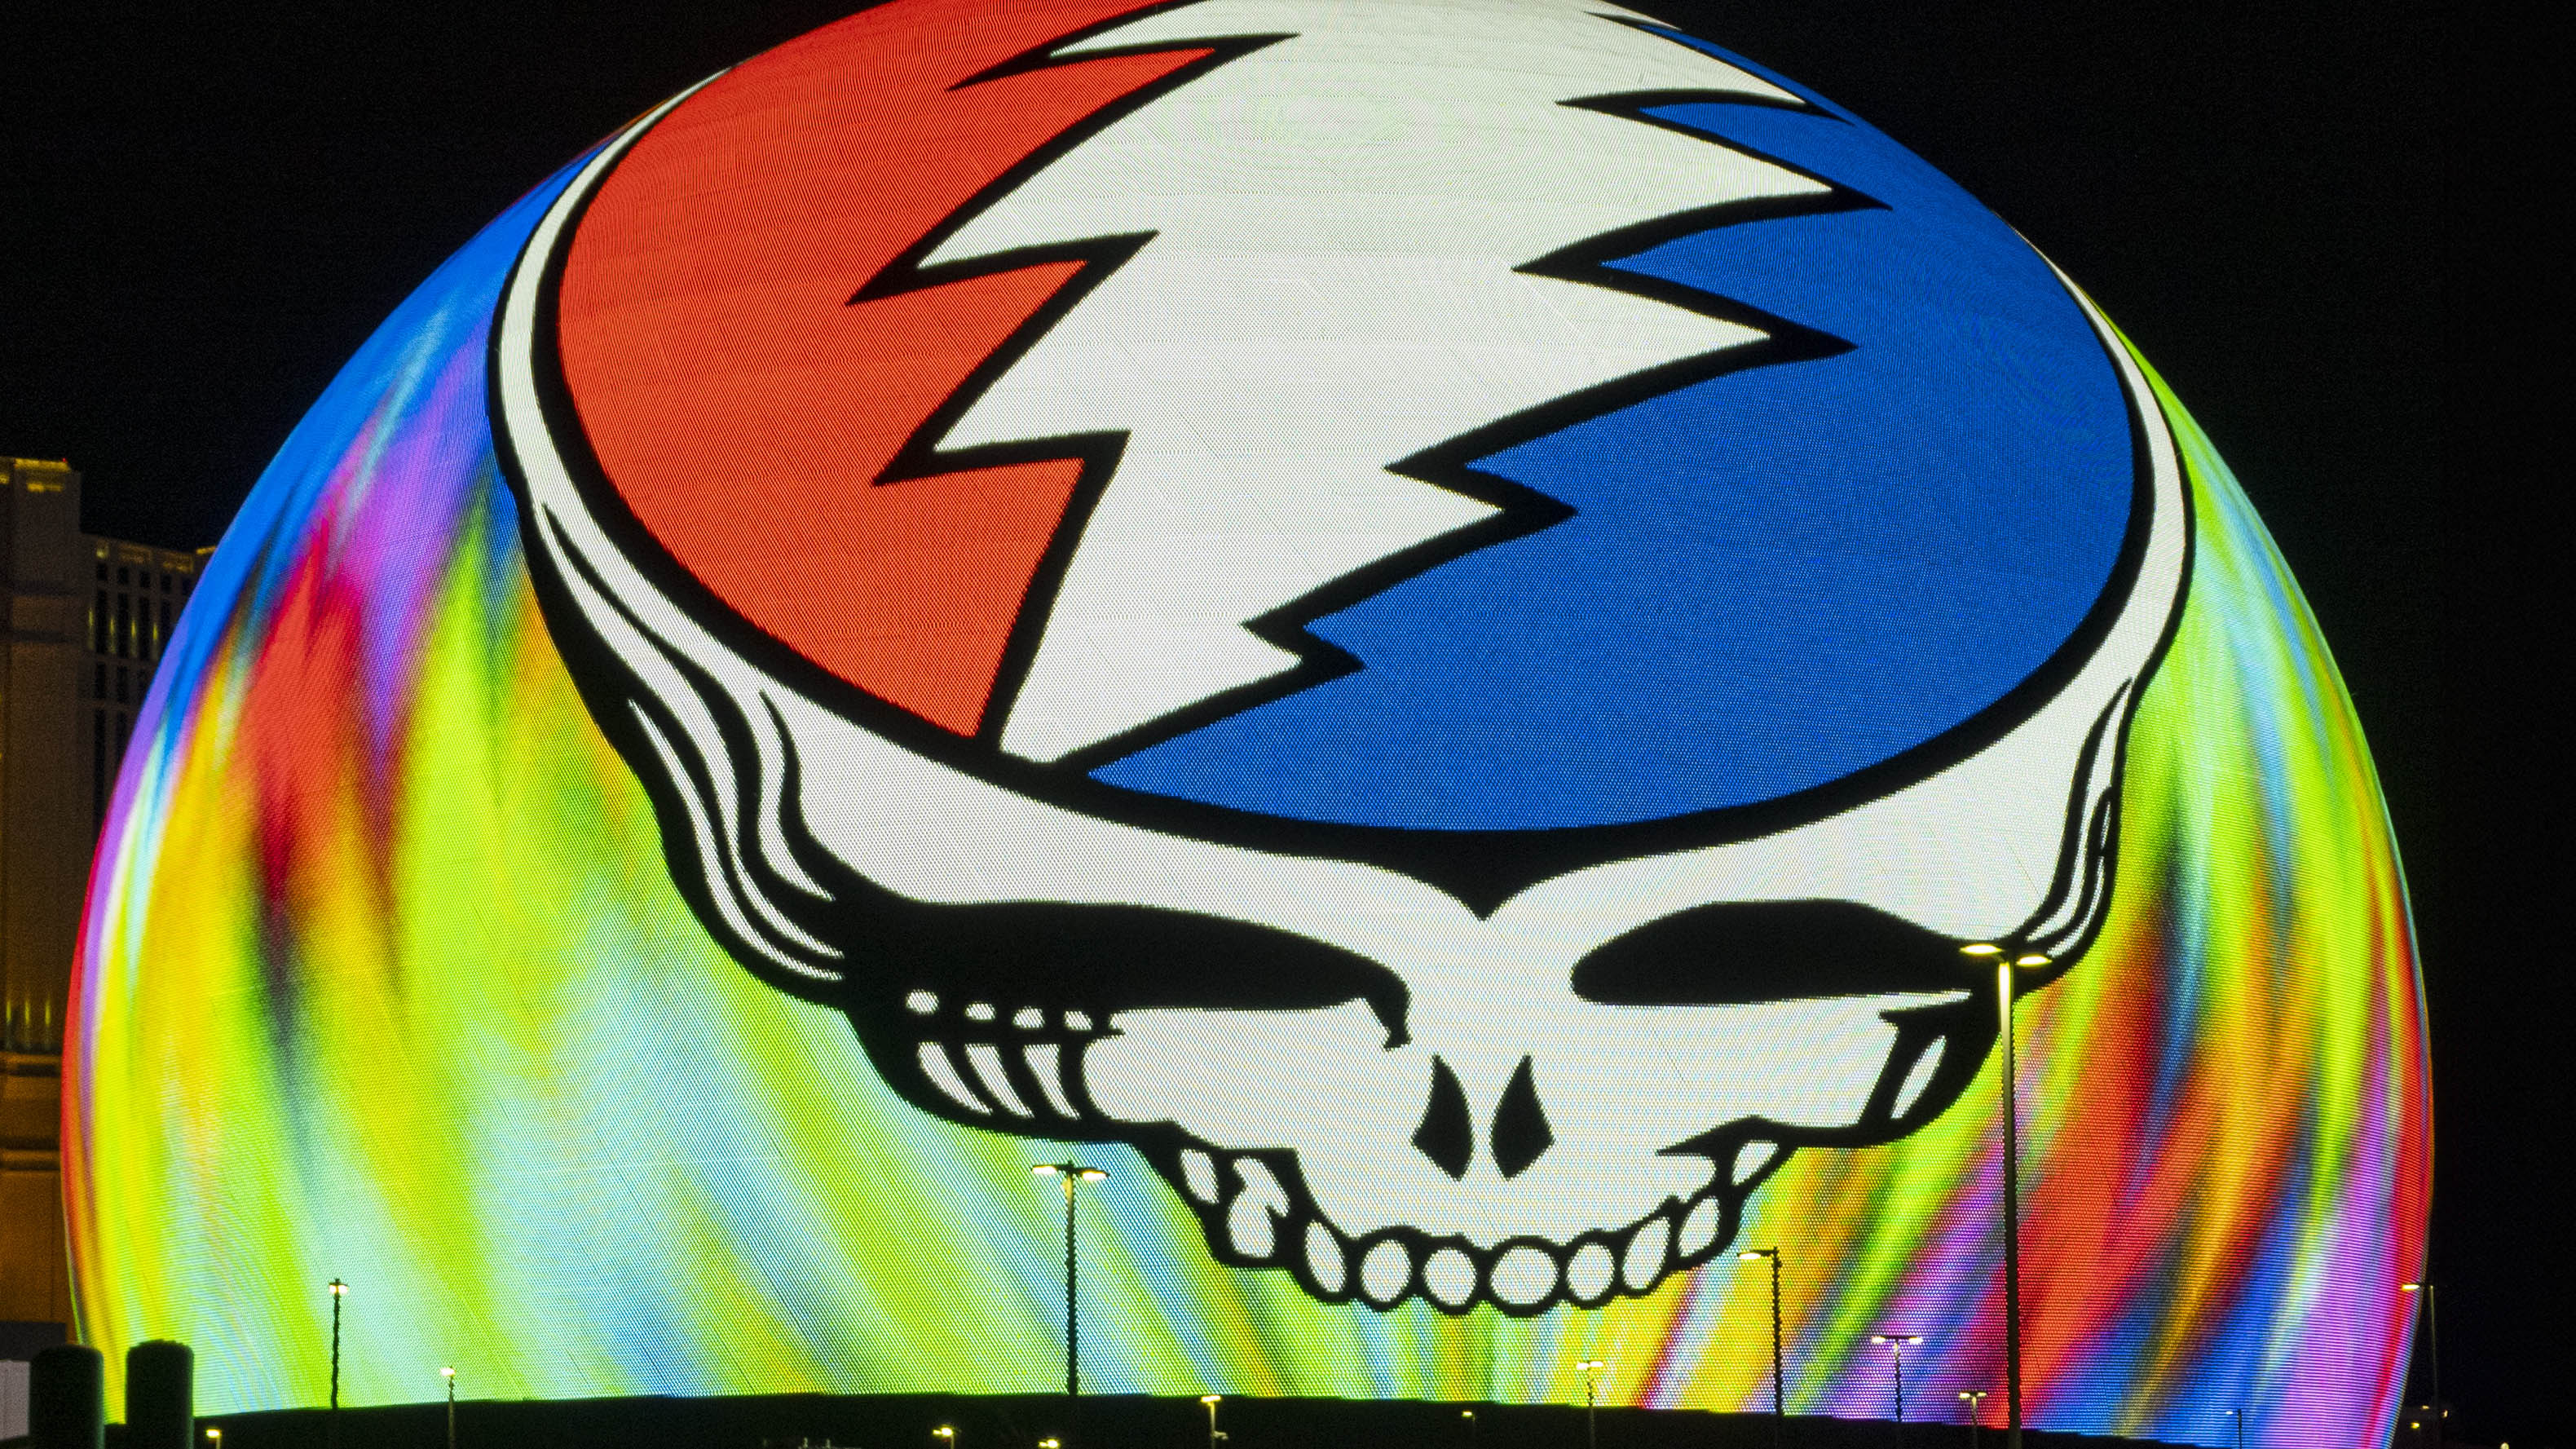 “Picture a bright blue ball... Dizzy with eternity": Dead & Company, with John Mayer, at The Sphere